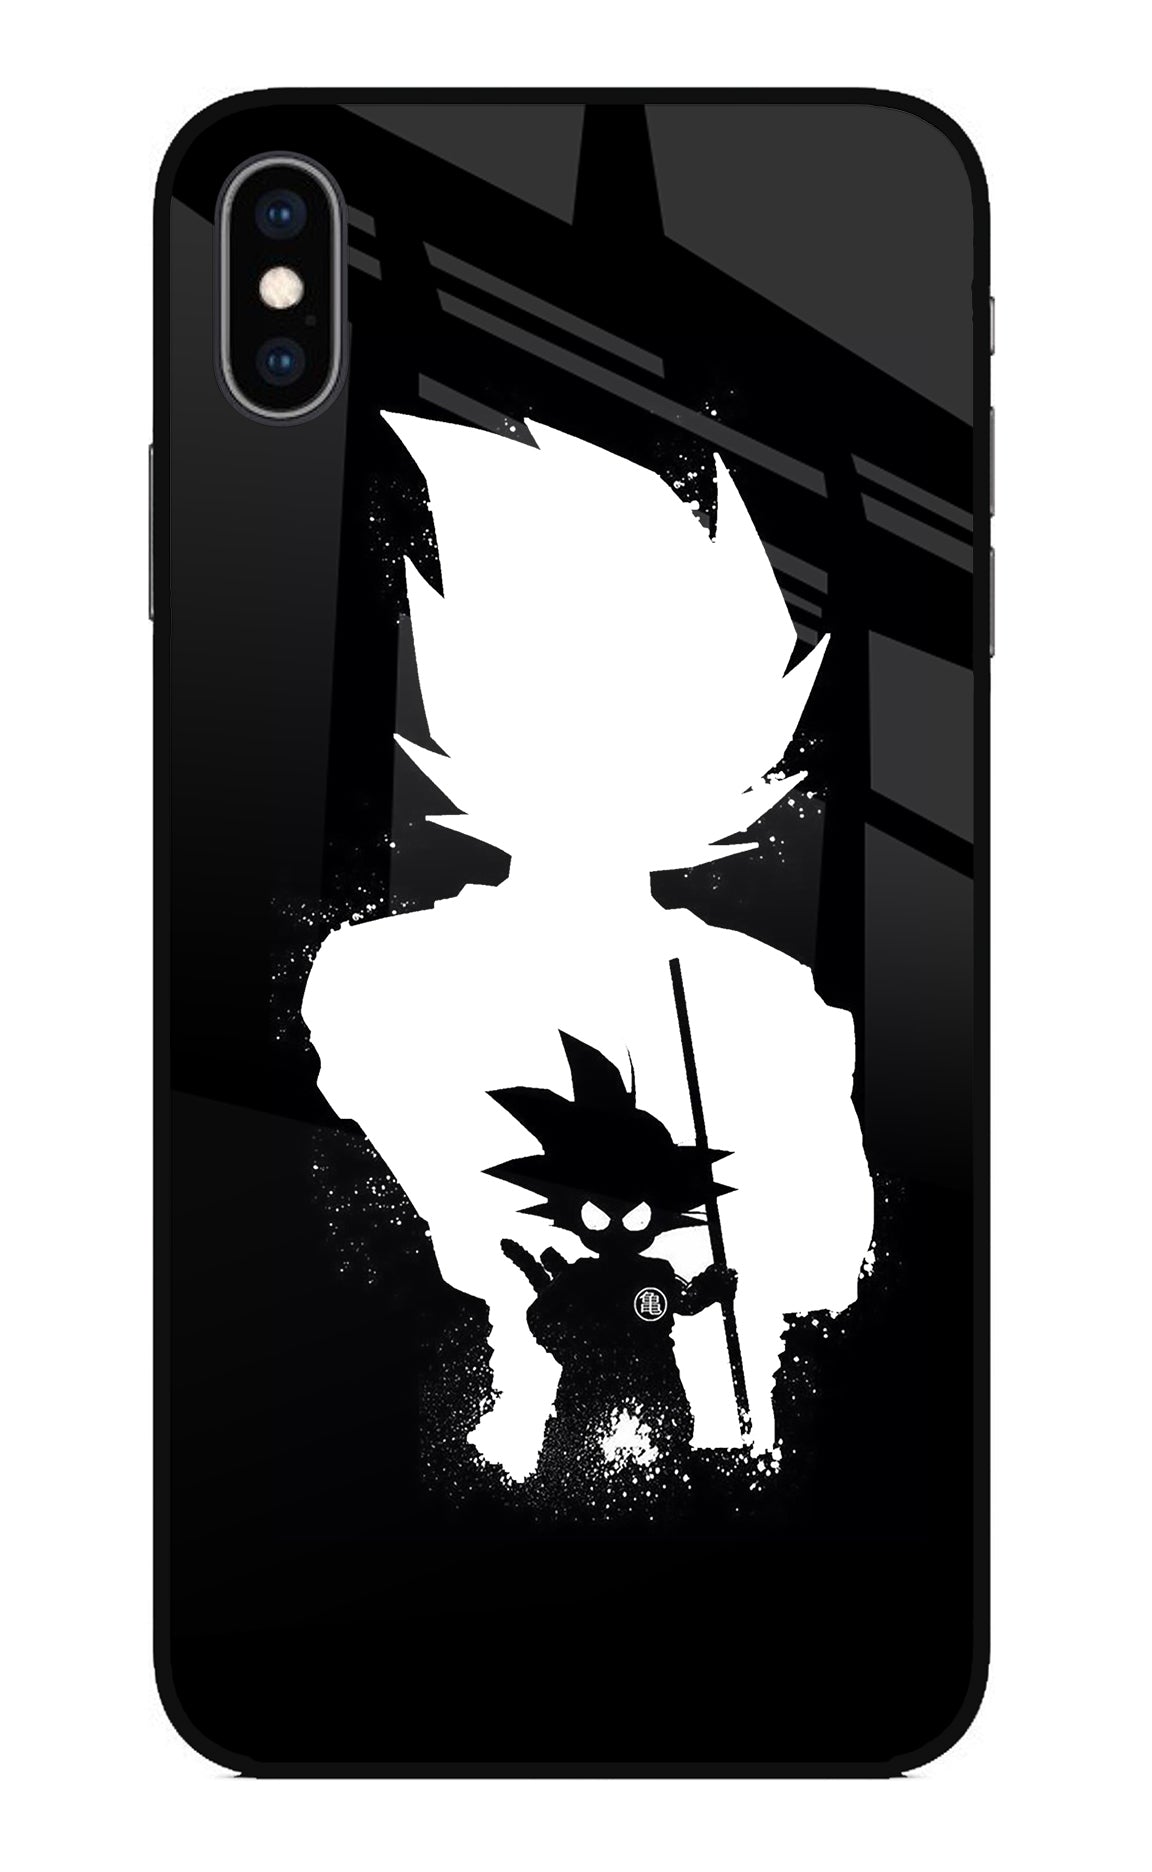 Goku Shadow iPhone XS Max Back Cover